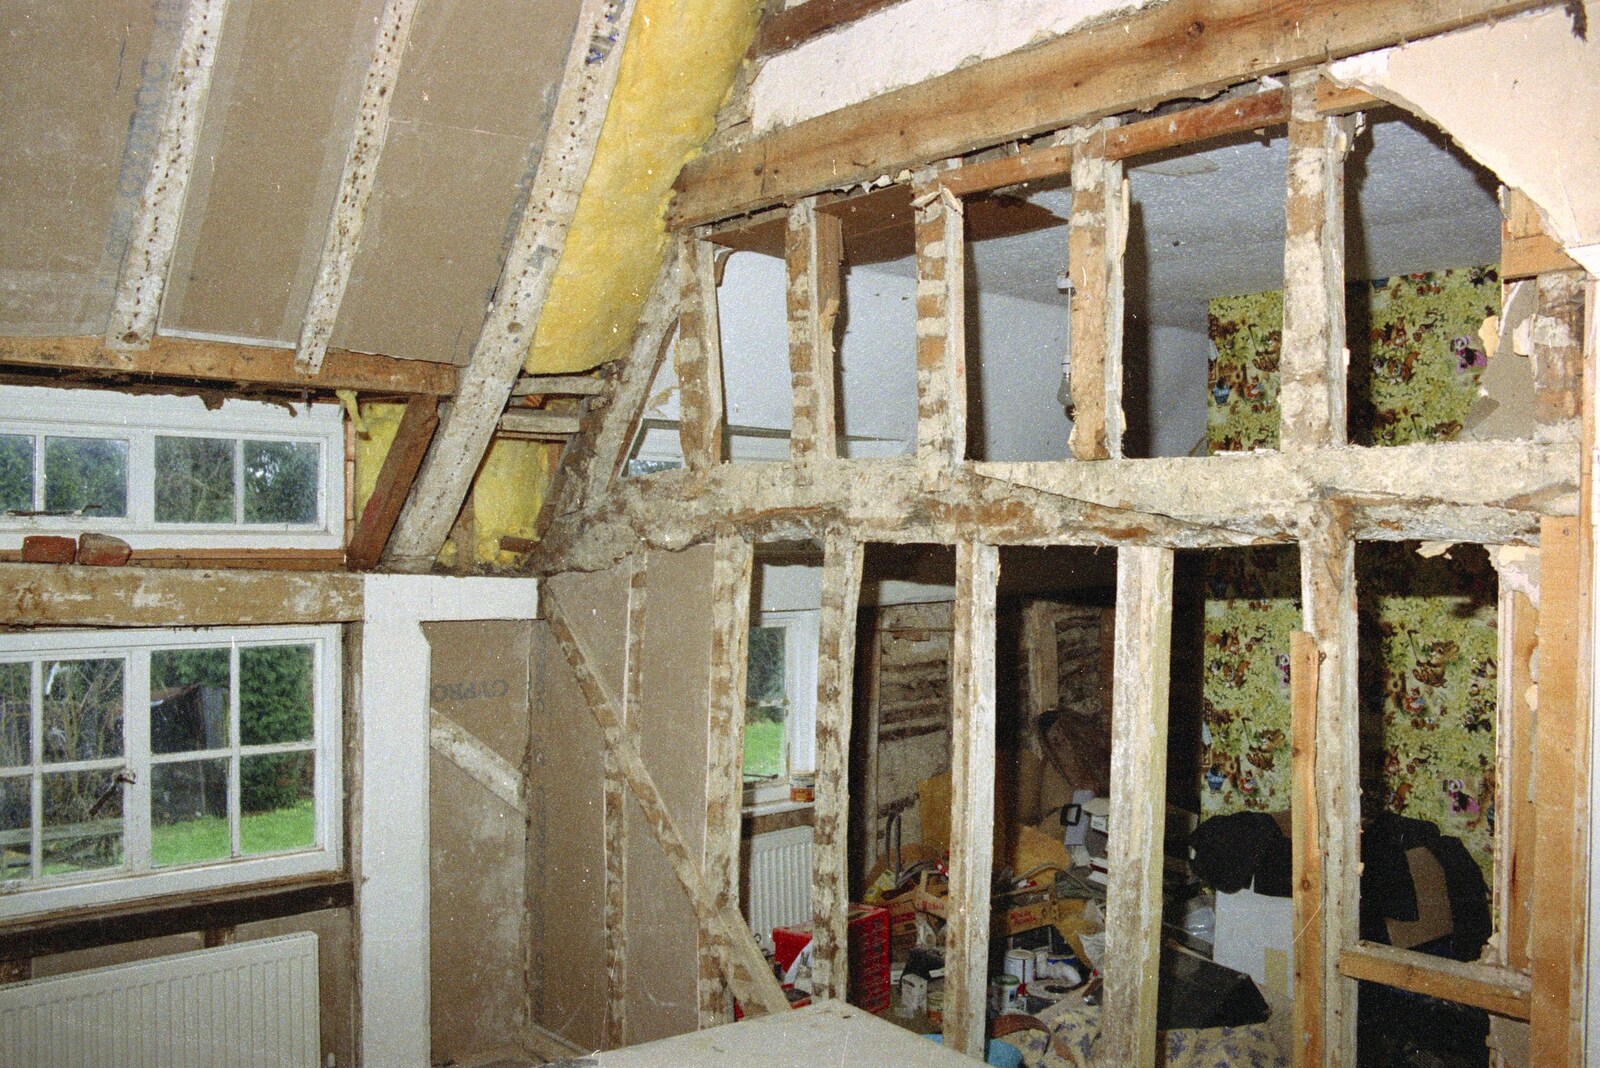 A Phil and Sean Weekend, and Bedroom Building, Brome, Norwich and Southwold - 18th April 1995: The bedroom next door is visible through the wall